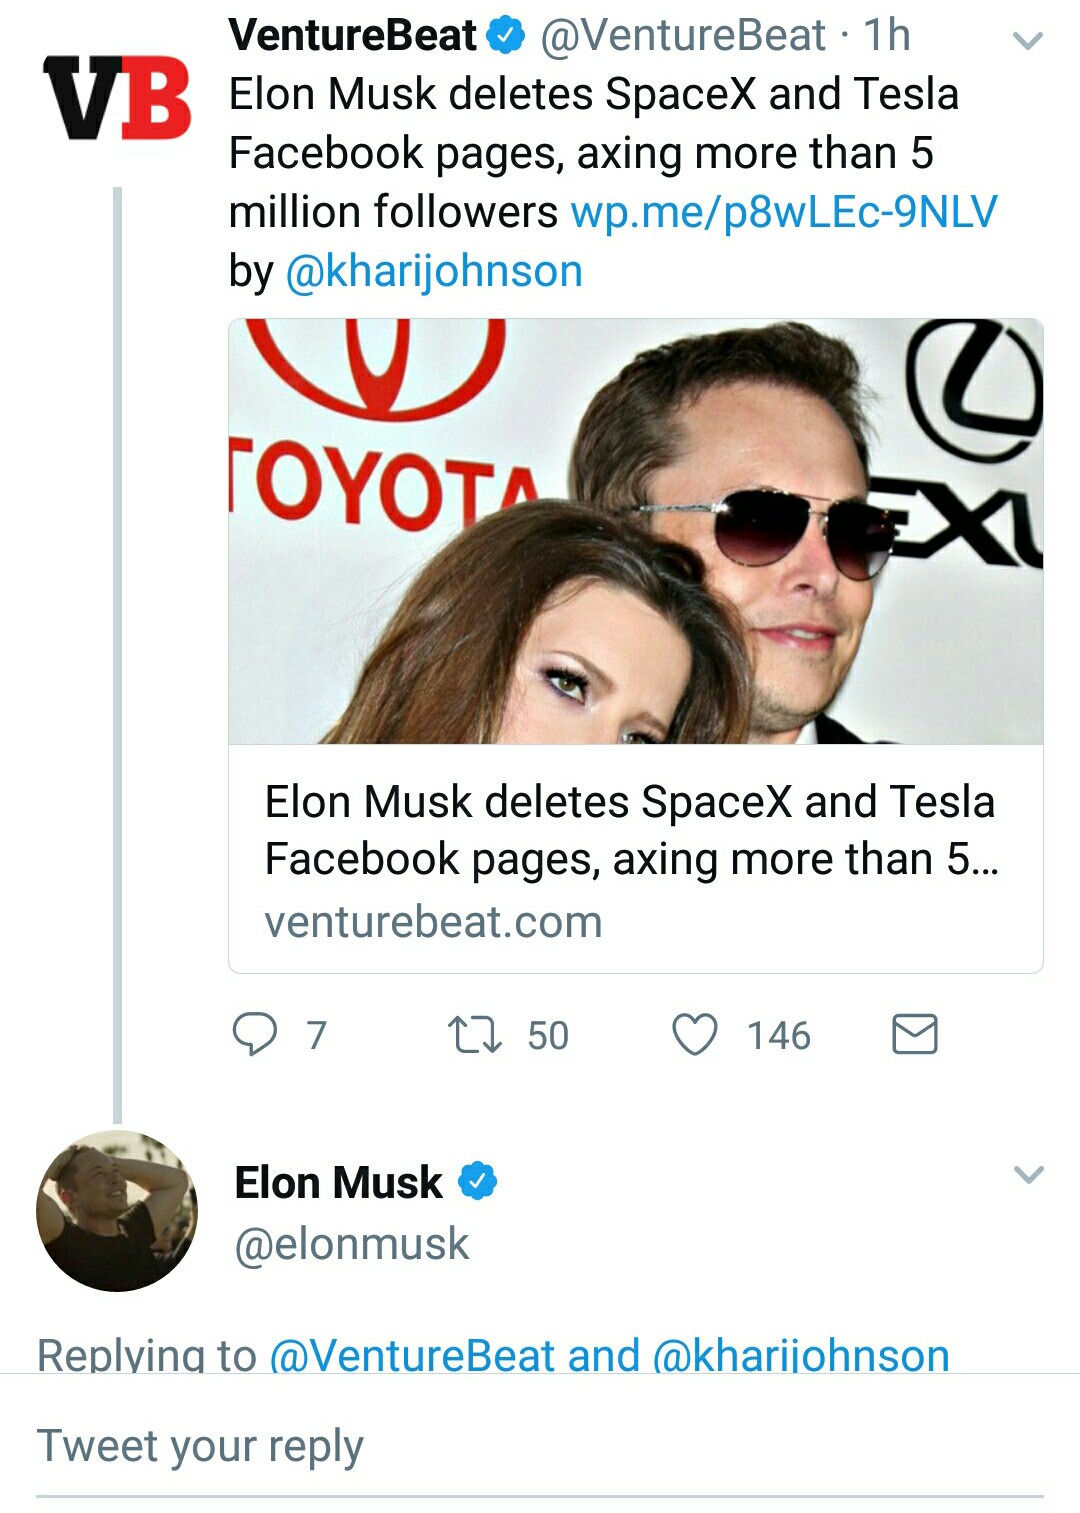 Elon Musk Deletes Both The SpaceX And Tesla Facebook Pages